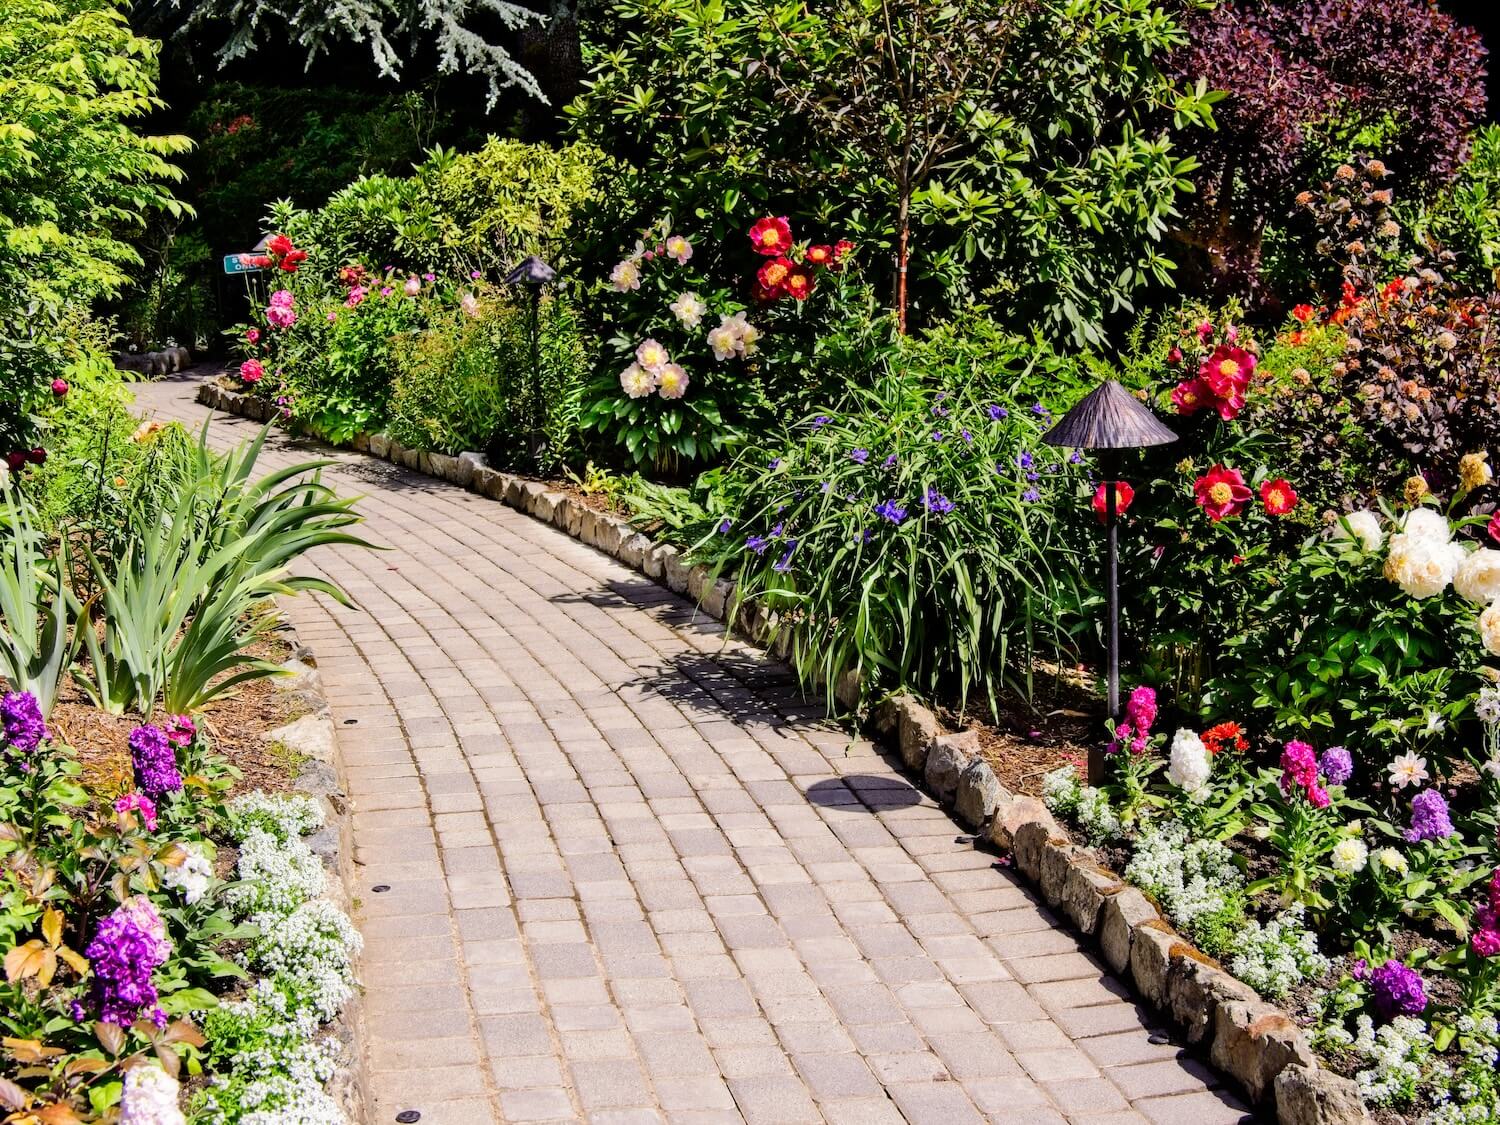 How Paver Walkways Can Make Your Outdoor Space More Elegant and Functional